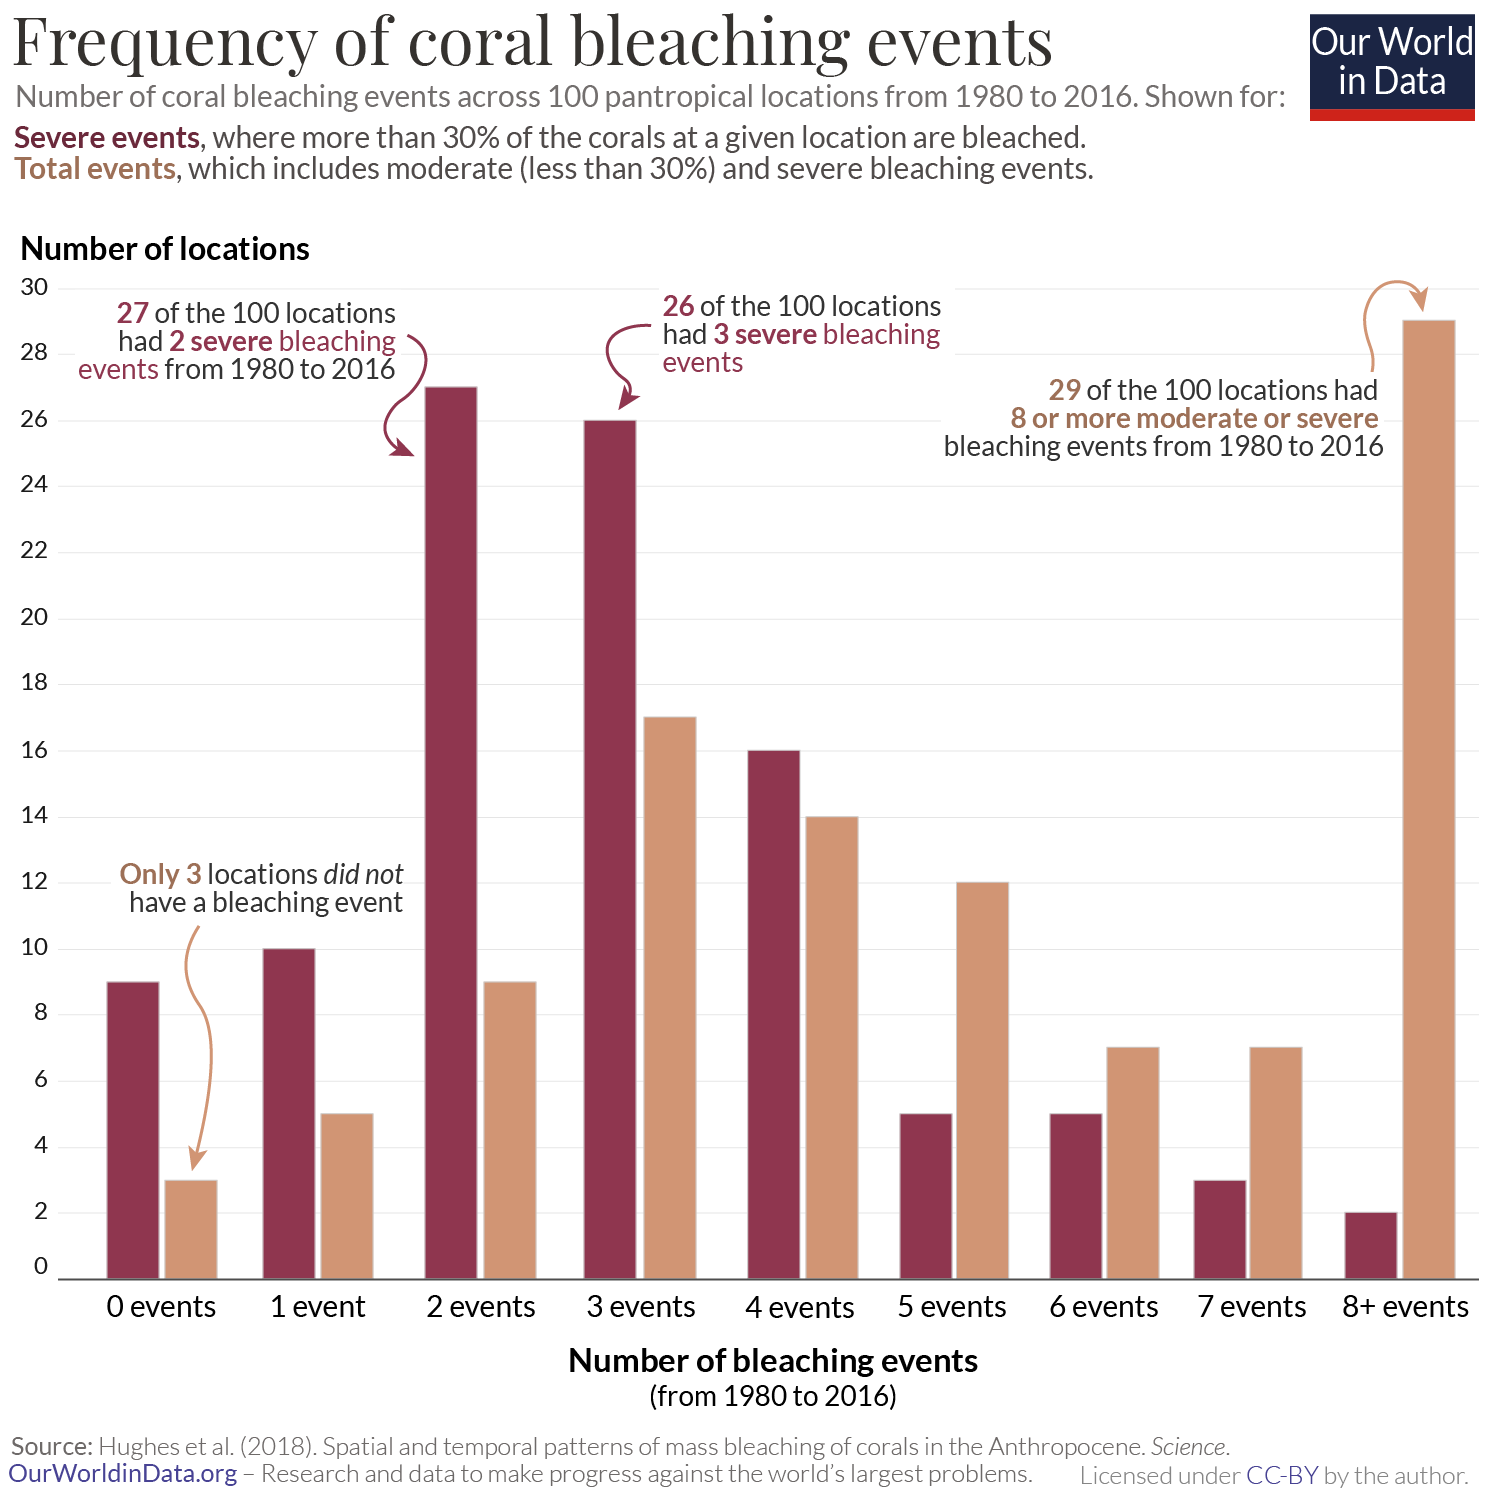 Frequency of coral bleaching events